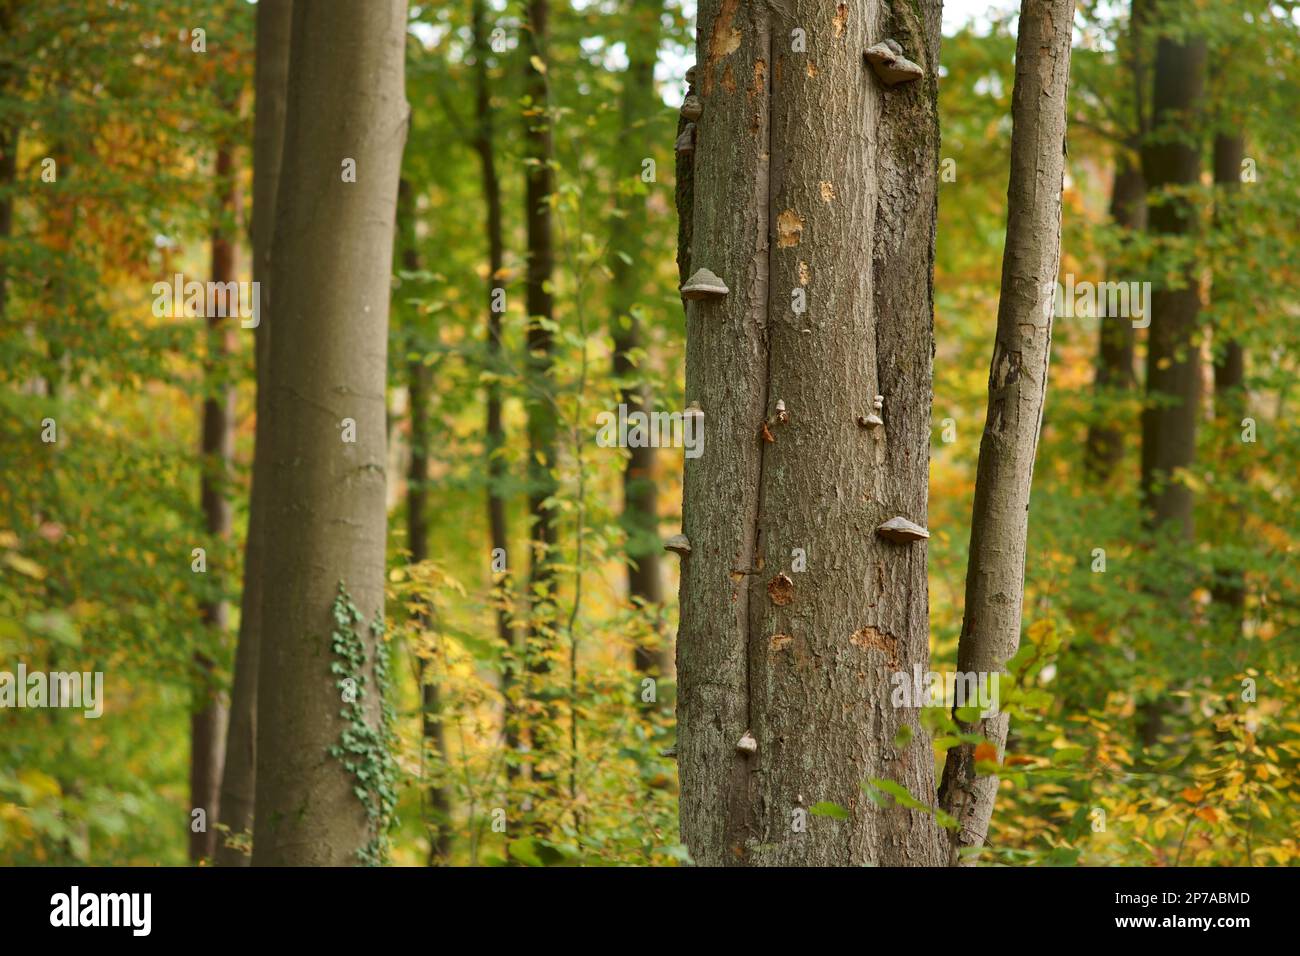 Tree fungi (Fomes fomentarius) (tinder fungus) on tree trunks in a semi-natural mixed deciduous forest in autumn. Germany, Brandenburg, Barnim Stock Photo